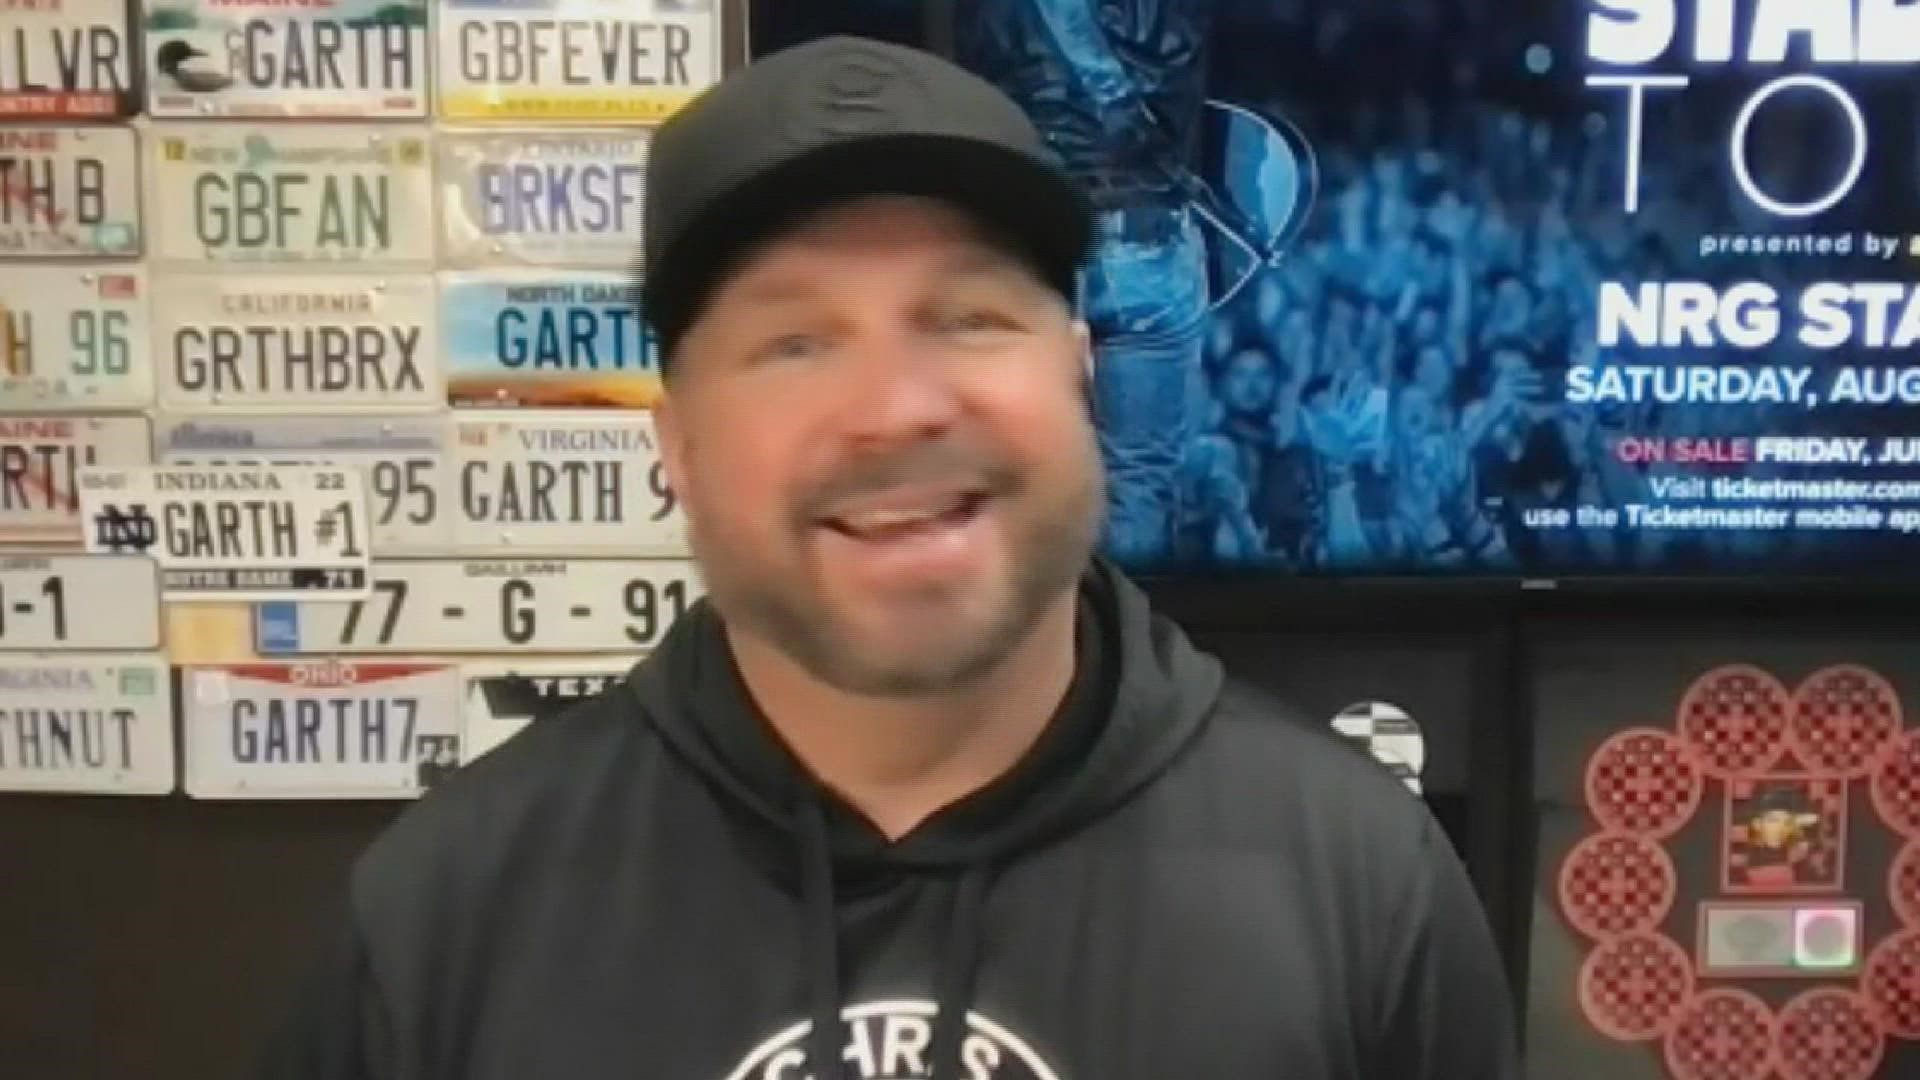 In an interview with 12News, Garth Brooks shouts out country music legends from Southeast Texas and talks about his upcoming concert at NRG Stadium in Houston.